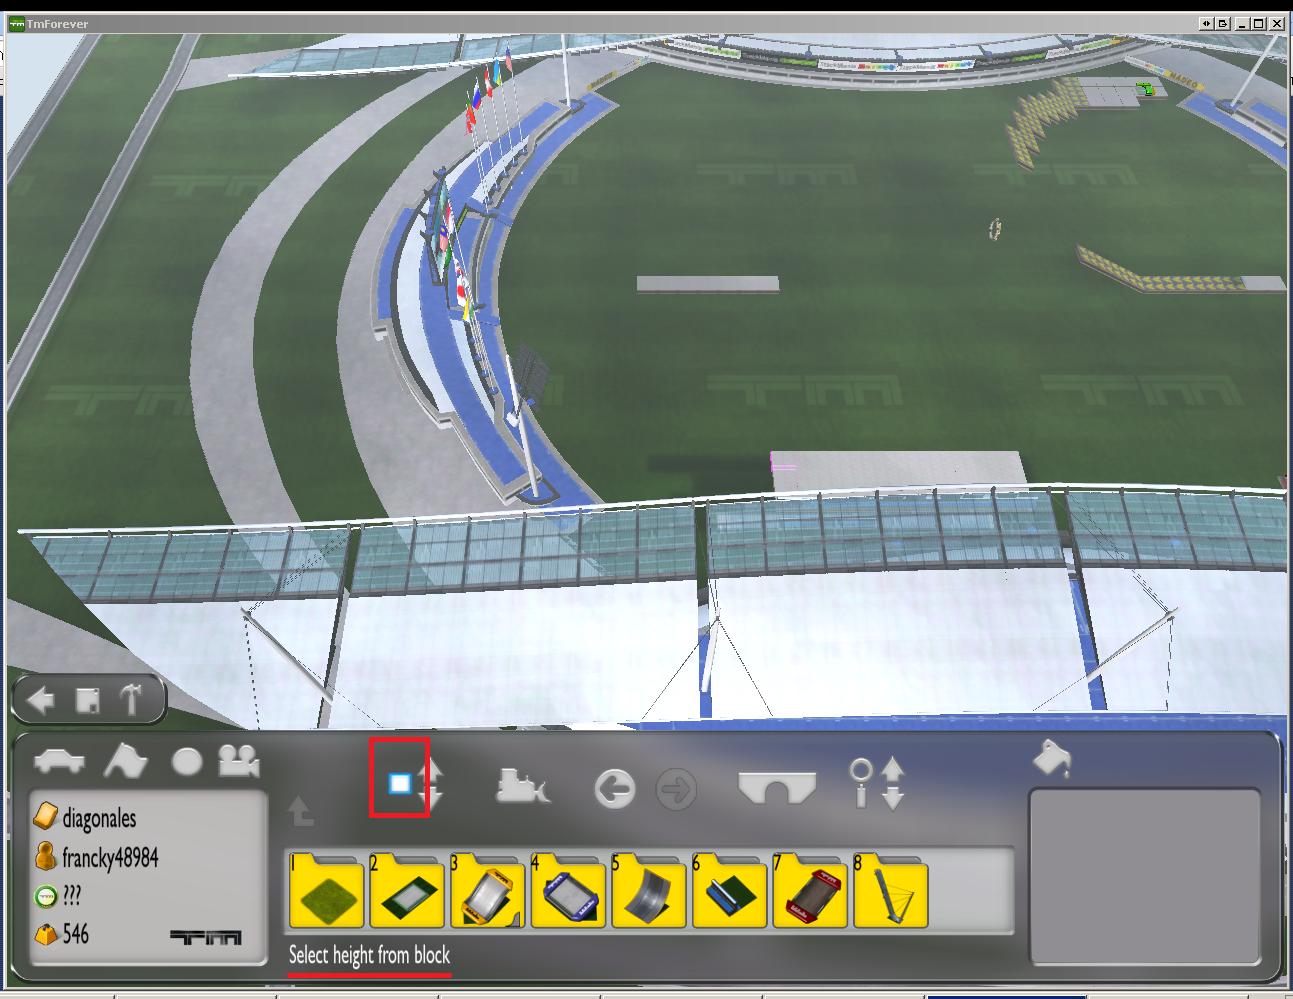 How does the old version of Trackmania differ from TrackMania Nations Forever?